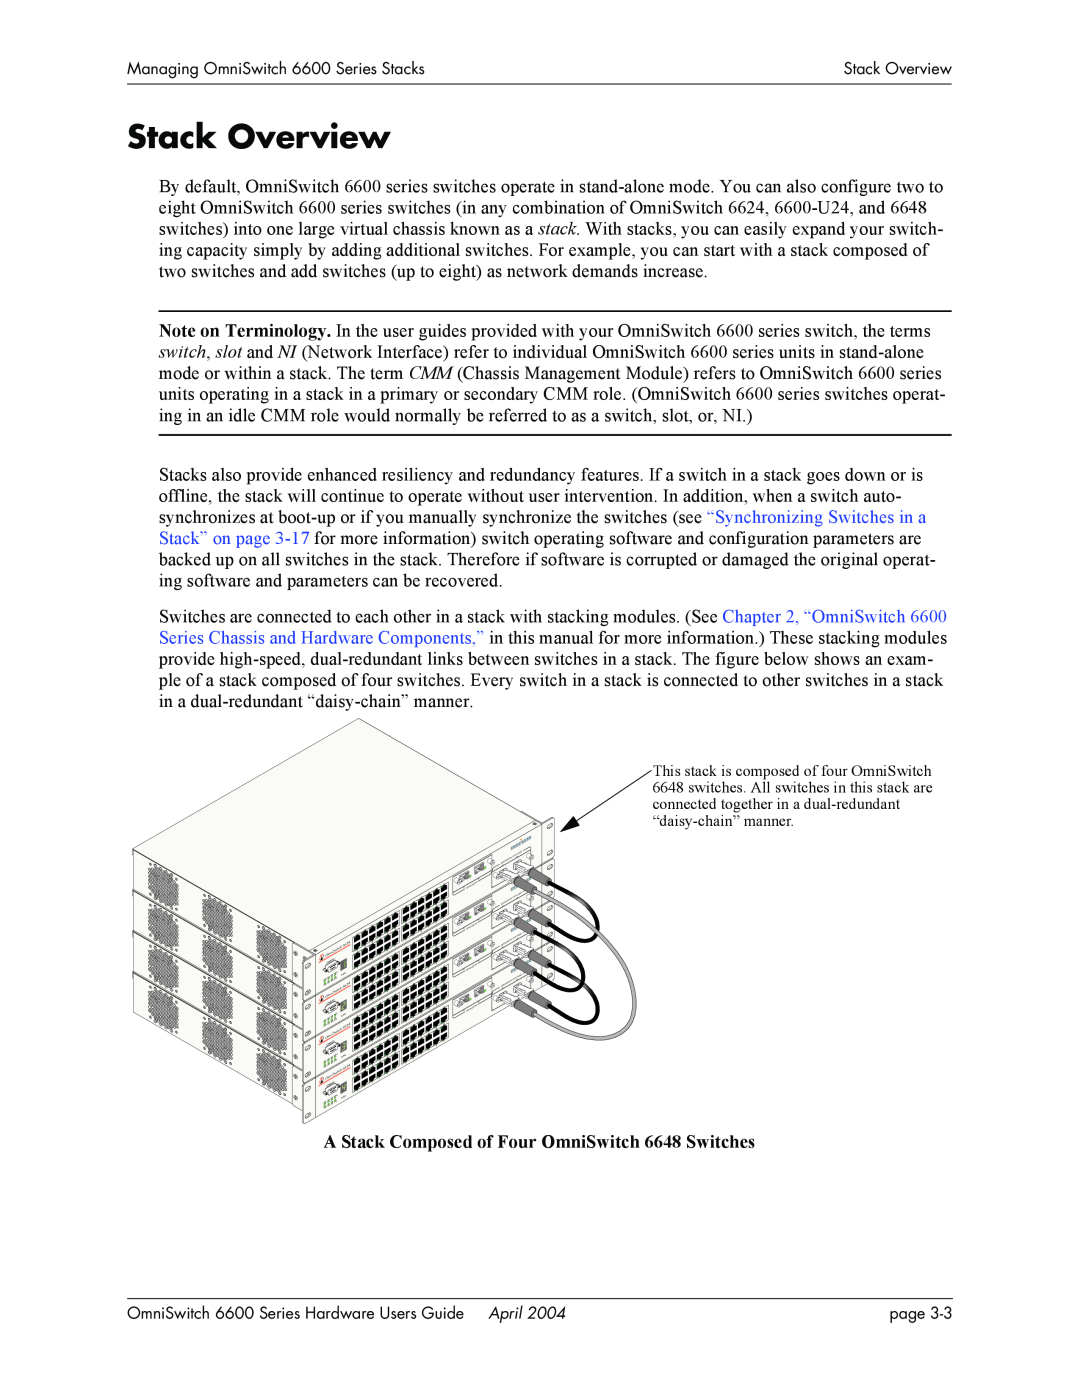 Alcatel-Lucent 6600 Series, 6624 manual Stack Overview, A Stack Composed of Four OmniSwitch 6648 Switches 